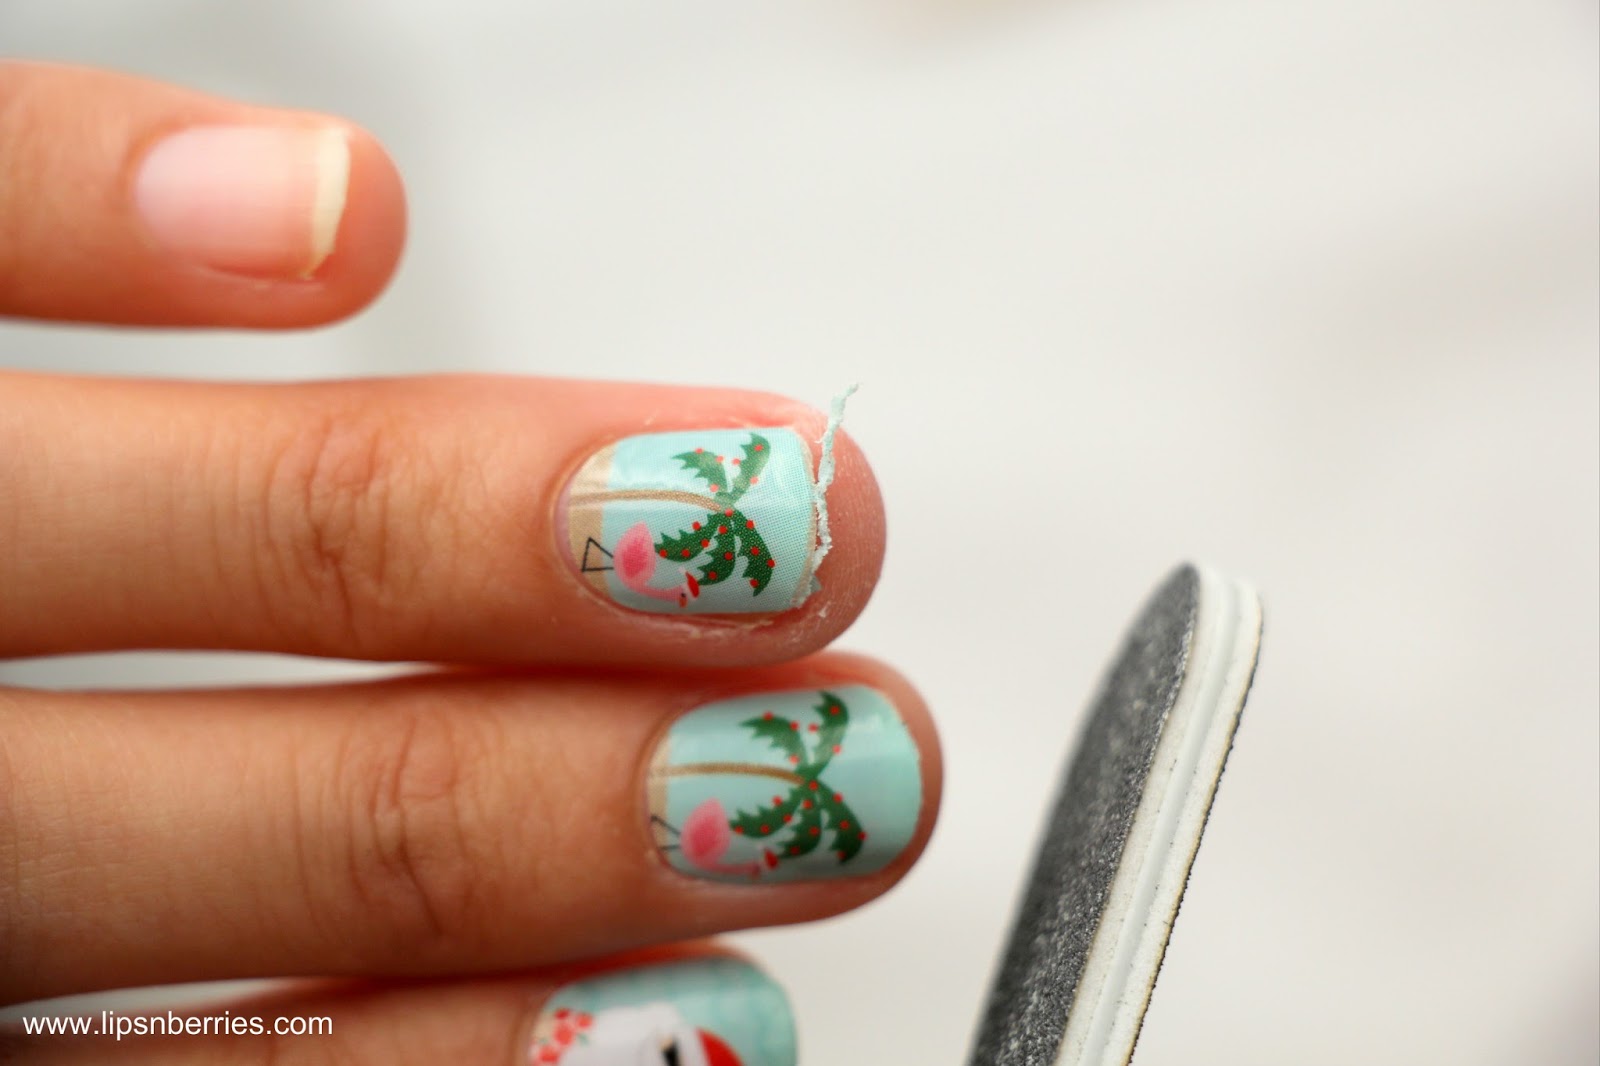 Jamberry Nails! Words of Wisdom from a Jamberry Noob | LIPS n BERRIES